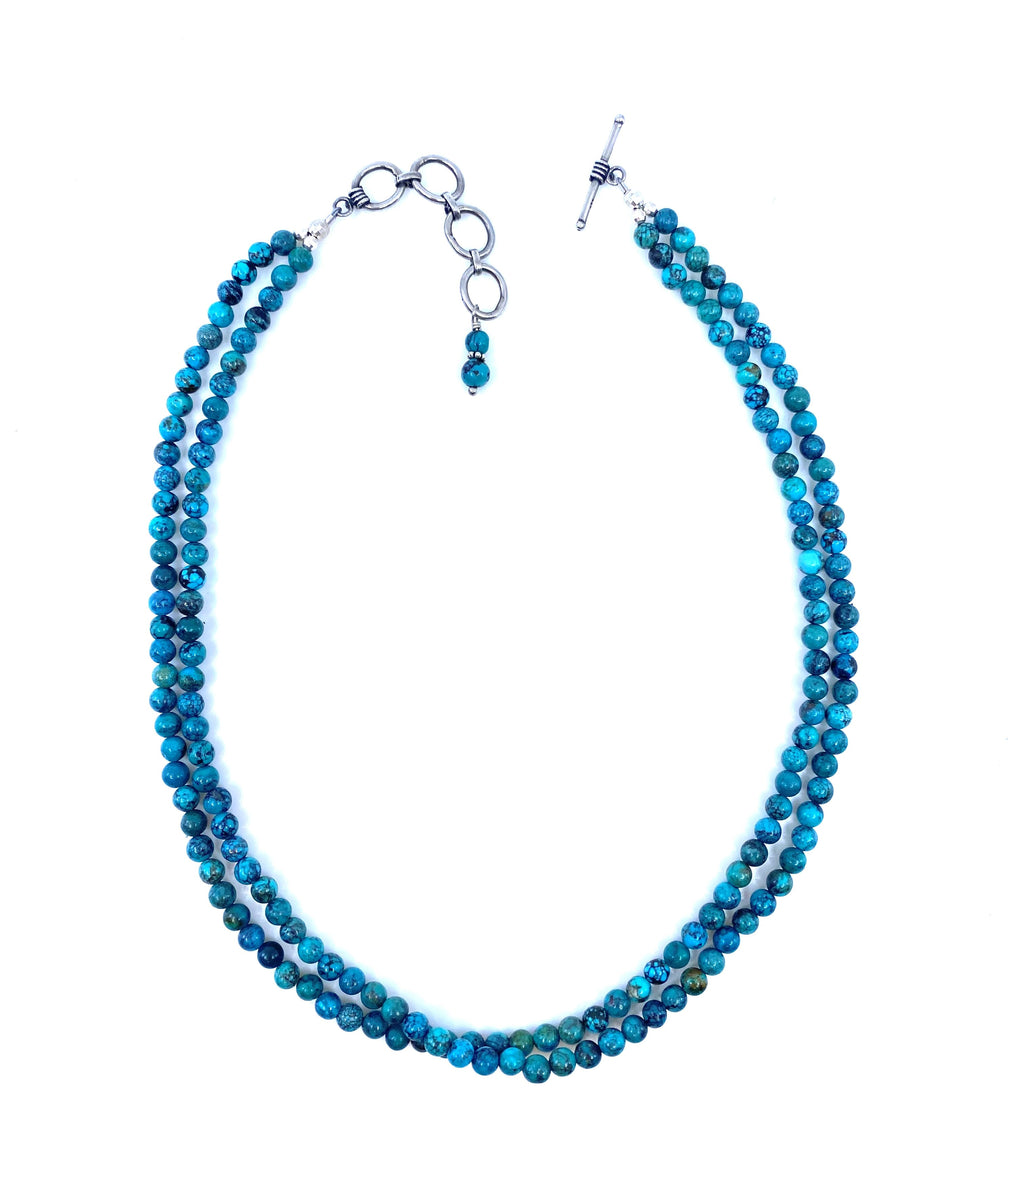 Stunning Turquoise Beaded Sterling Silver Double Strand Necklace